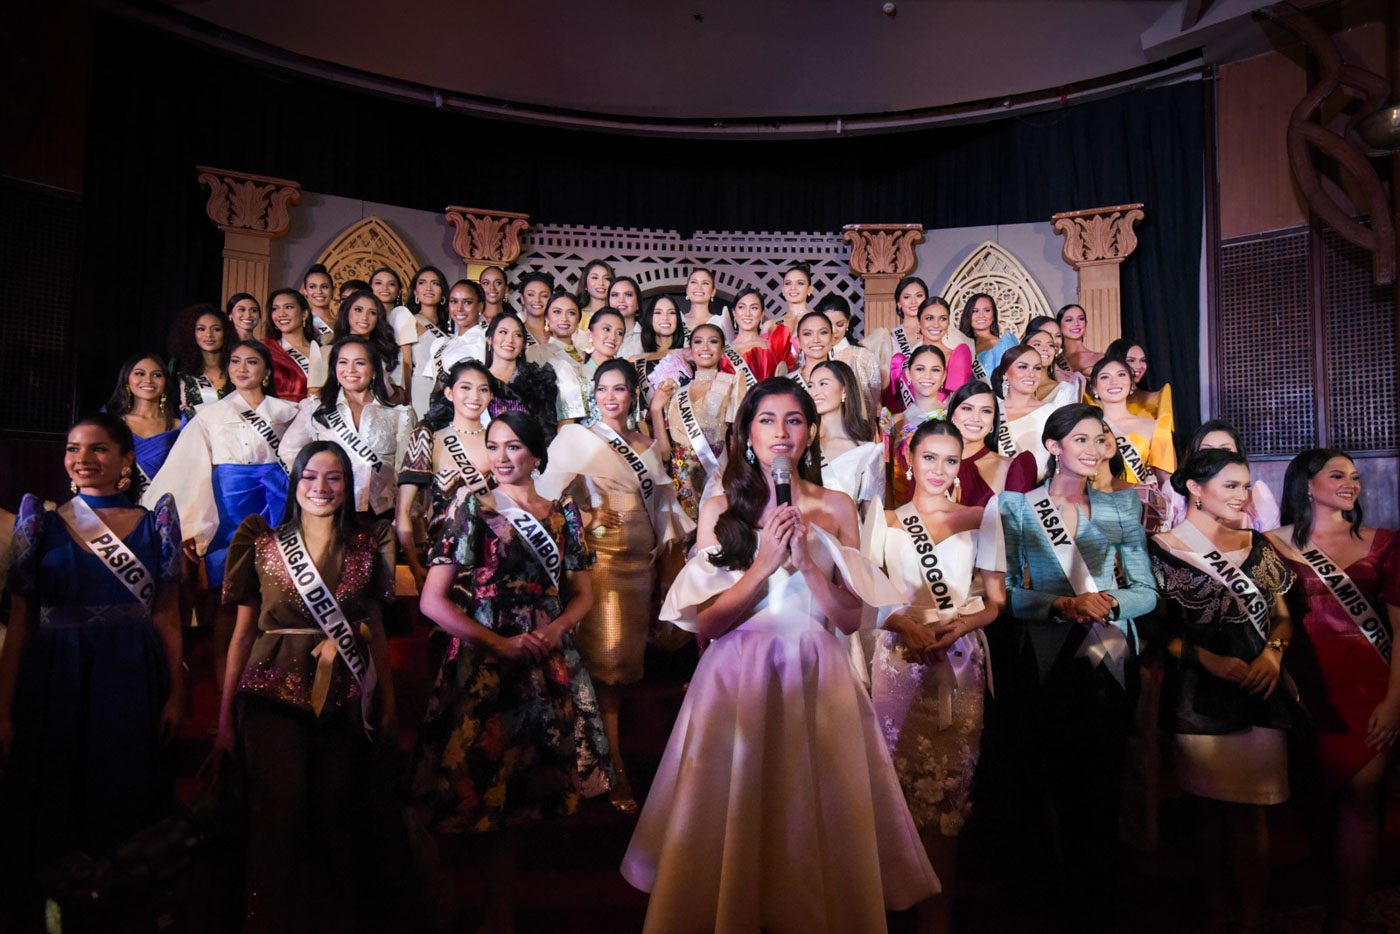 IN PHOTOS: Miss Universe Philippines 2020 candidates